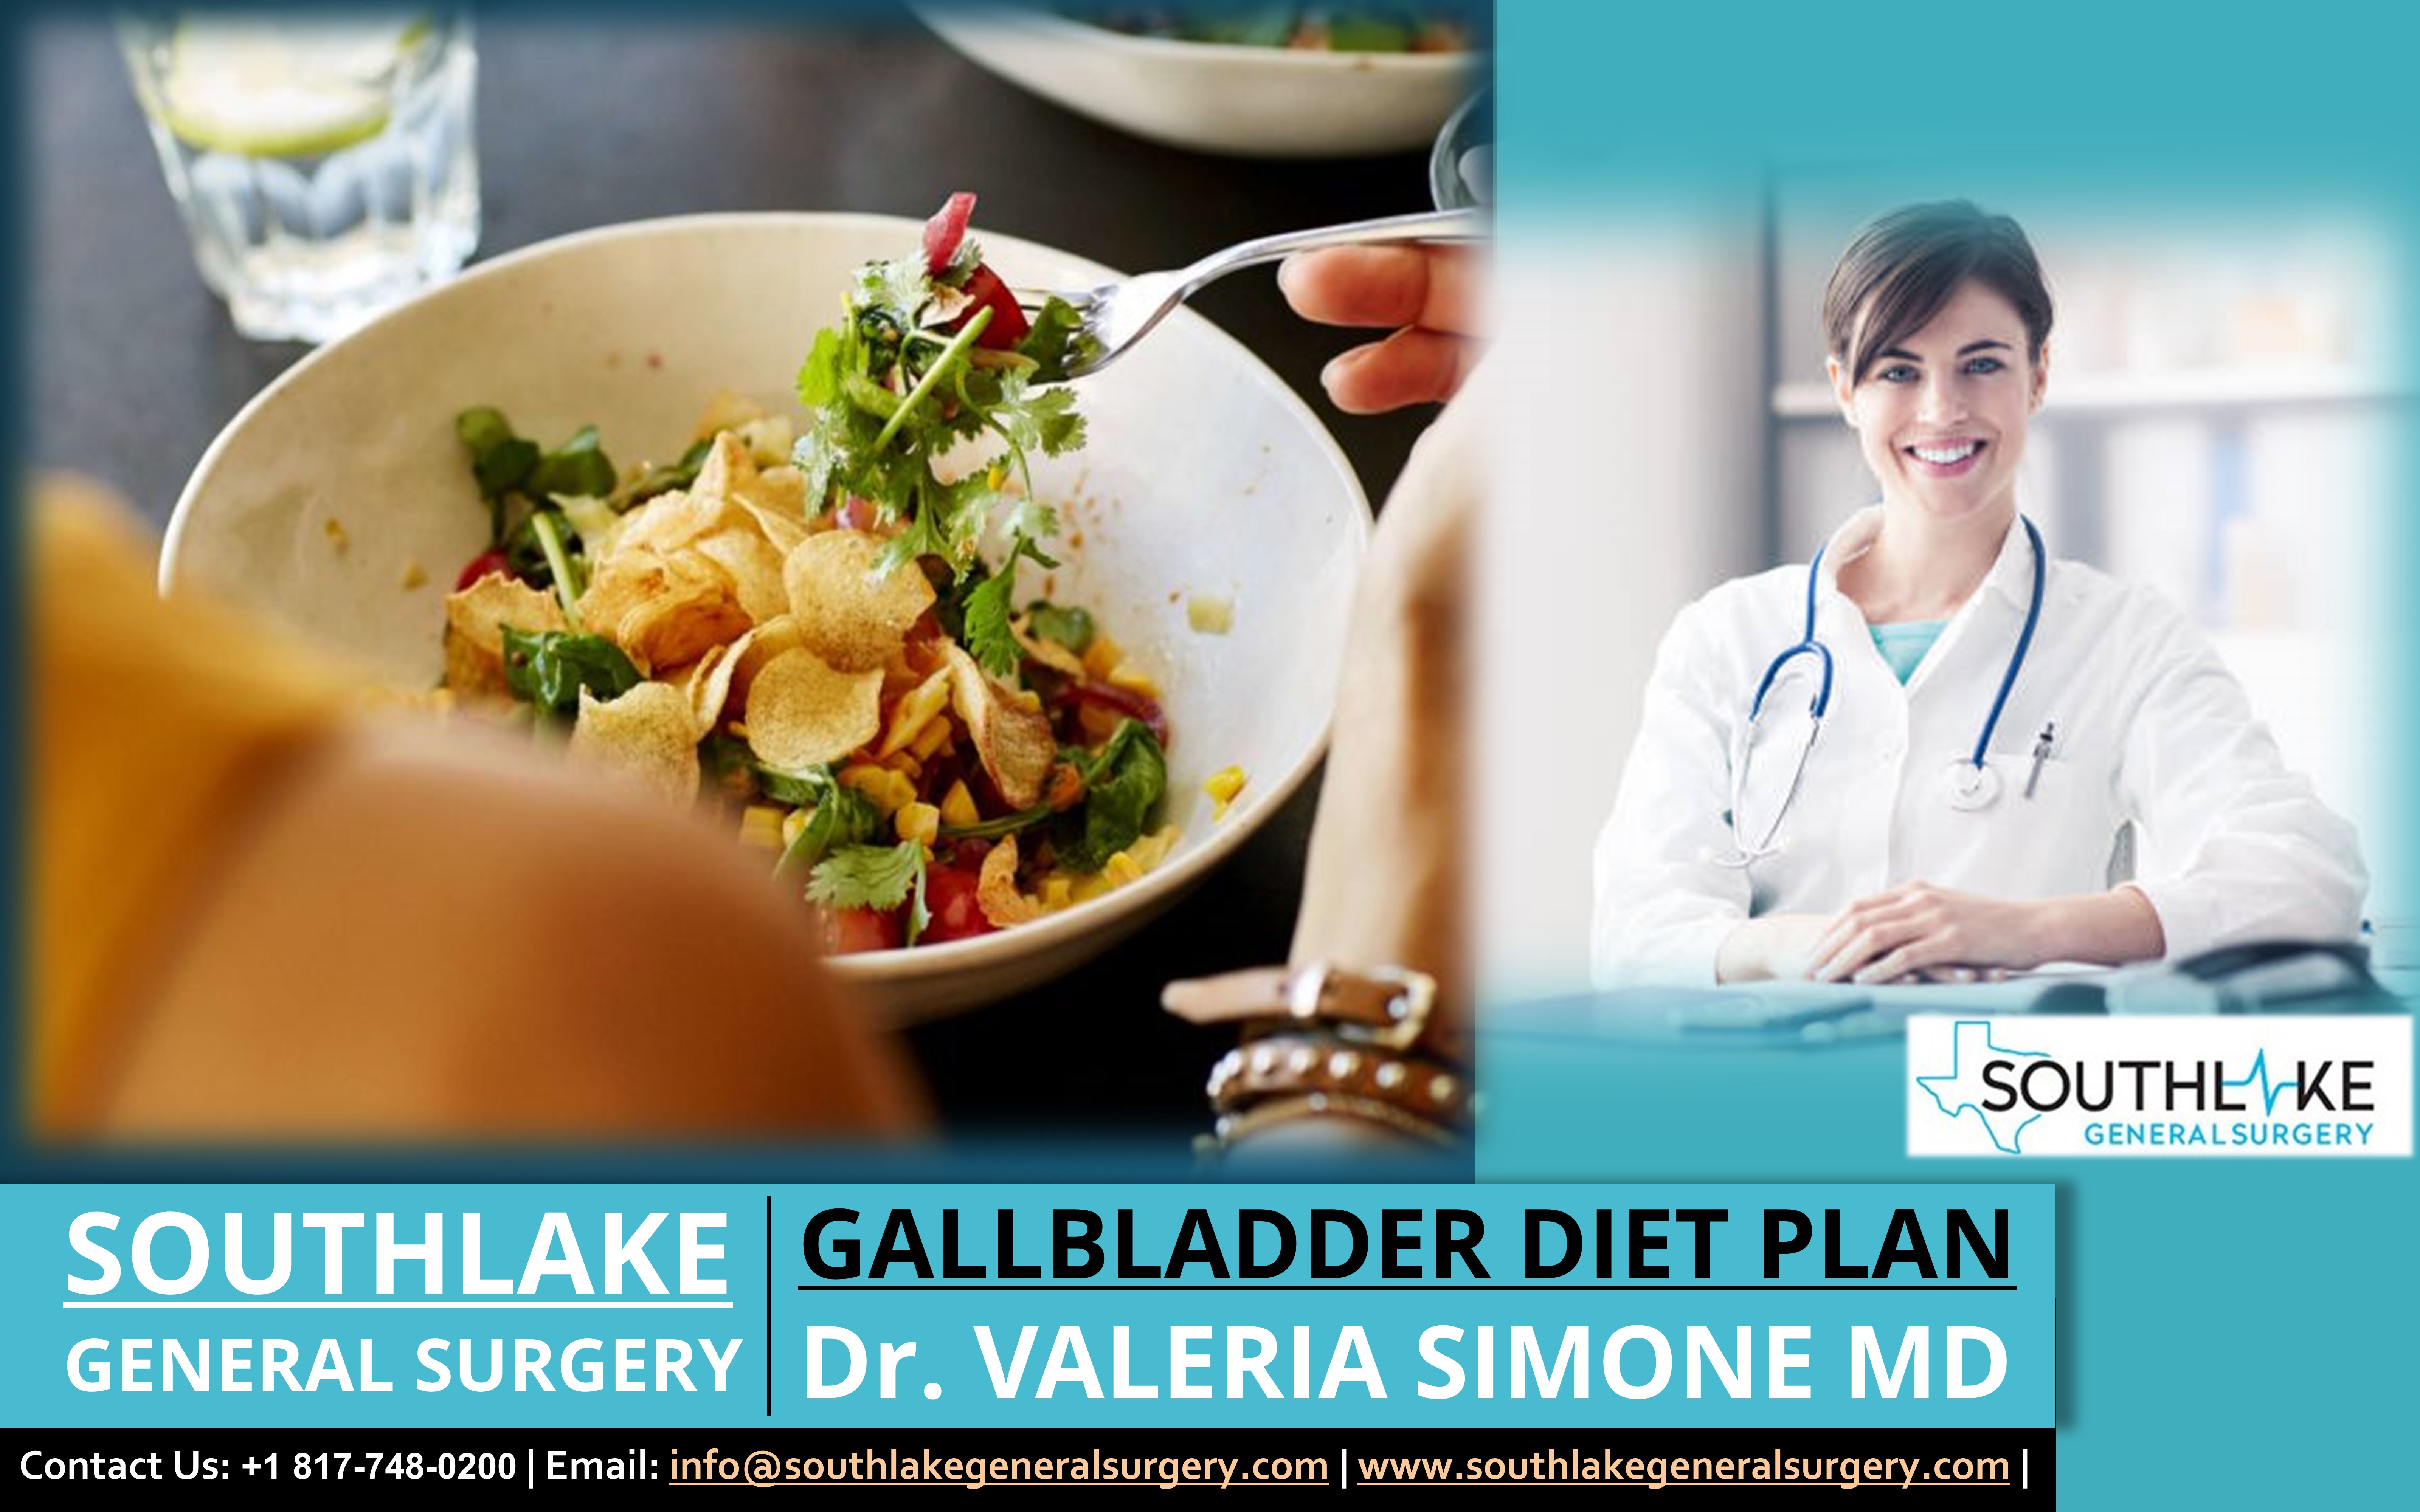 Top 10 Gallbladder Foods to Avoid for a Healthy Digestive System